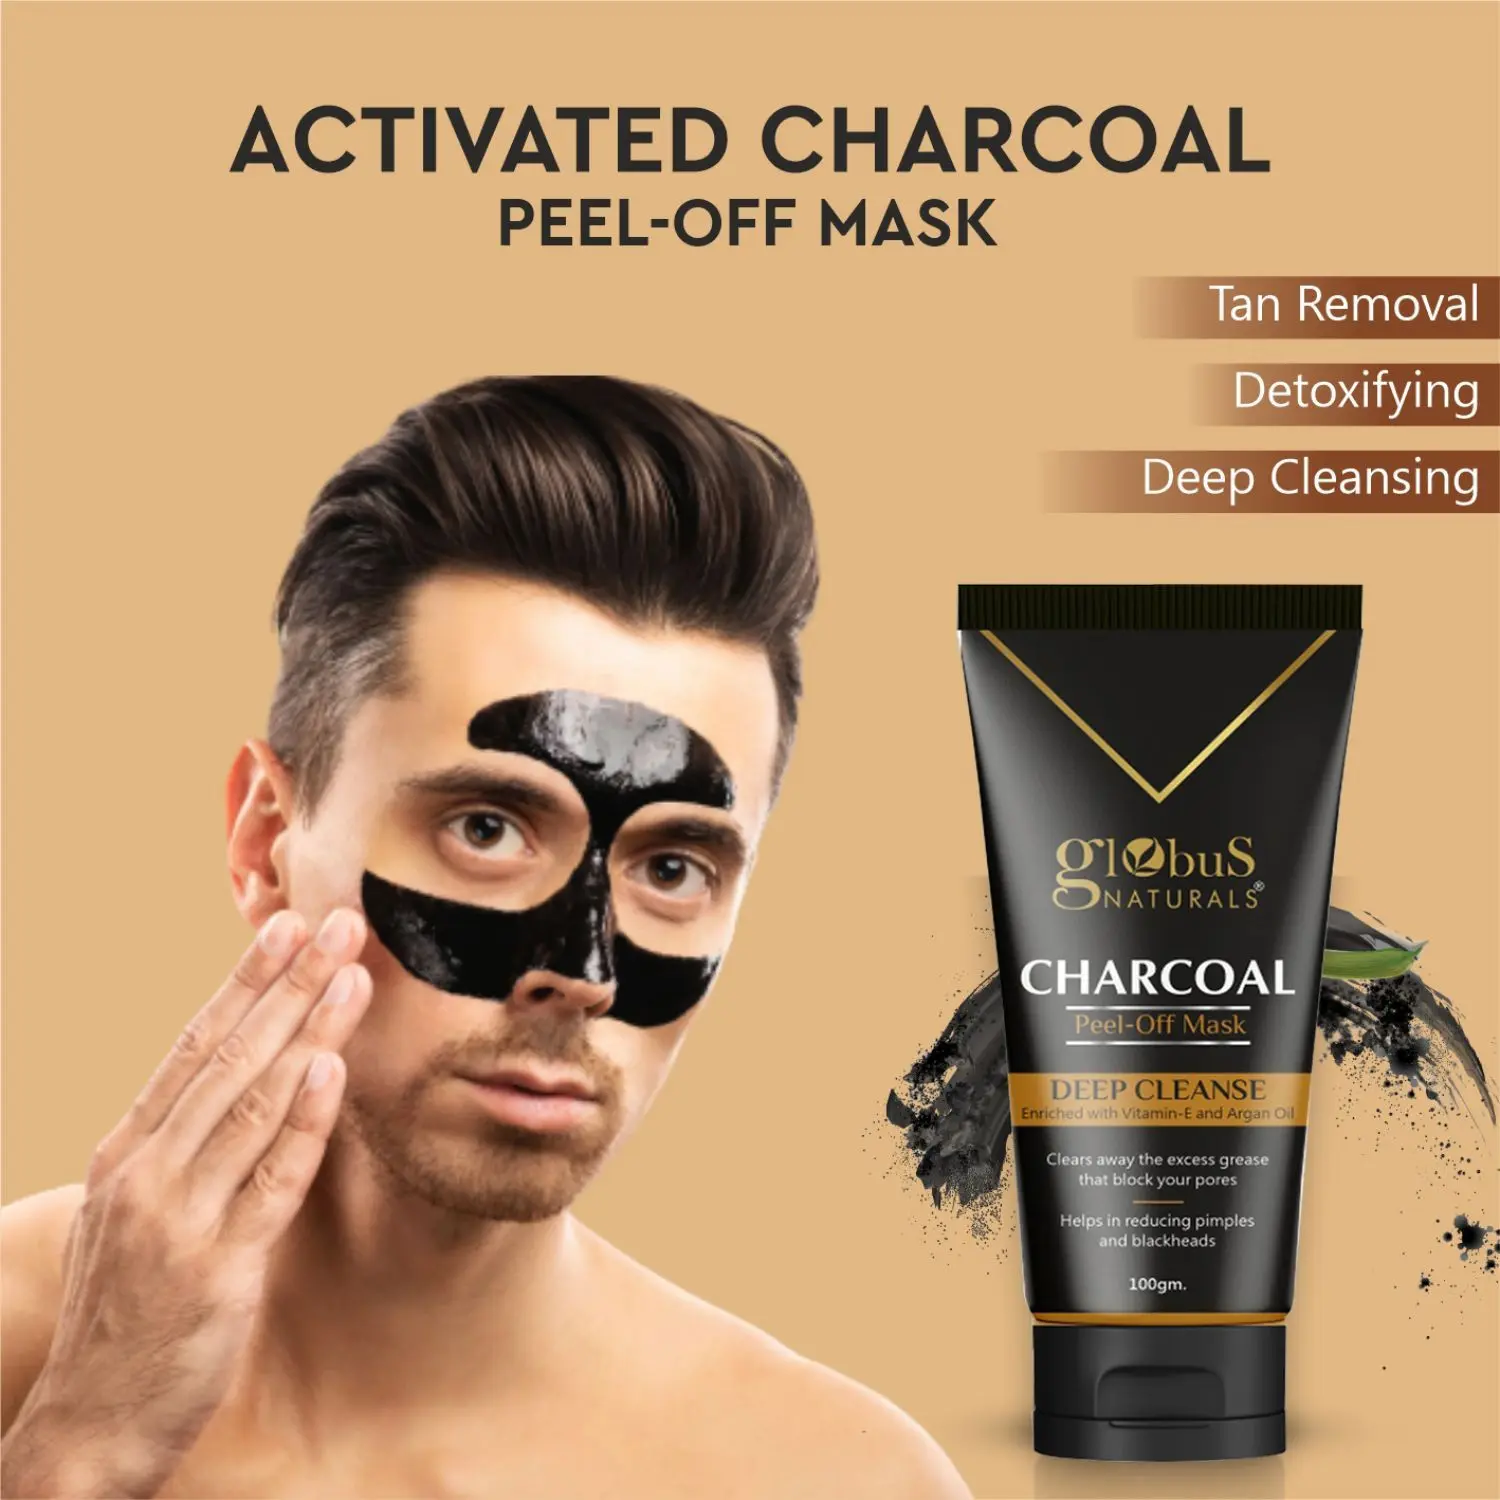 Globus Naturals Anti Pollution & Anti Acne Charcoal Peel Off Mask, Detoxifying Face mask, Fights Pollution and De-Tans skin, For Men with Oily & Acne Prone Skin, 100 gms